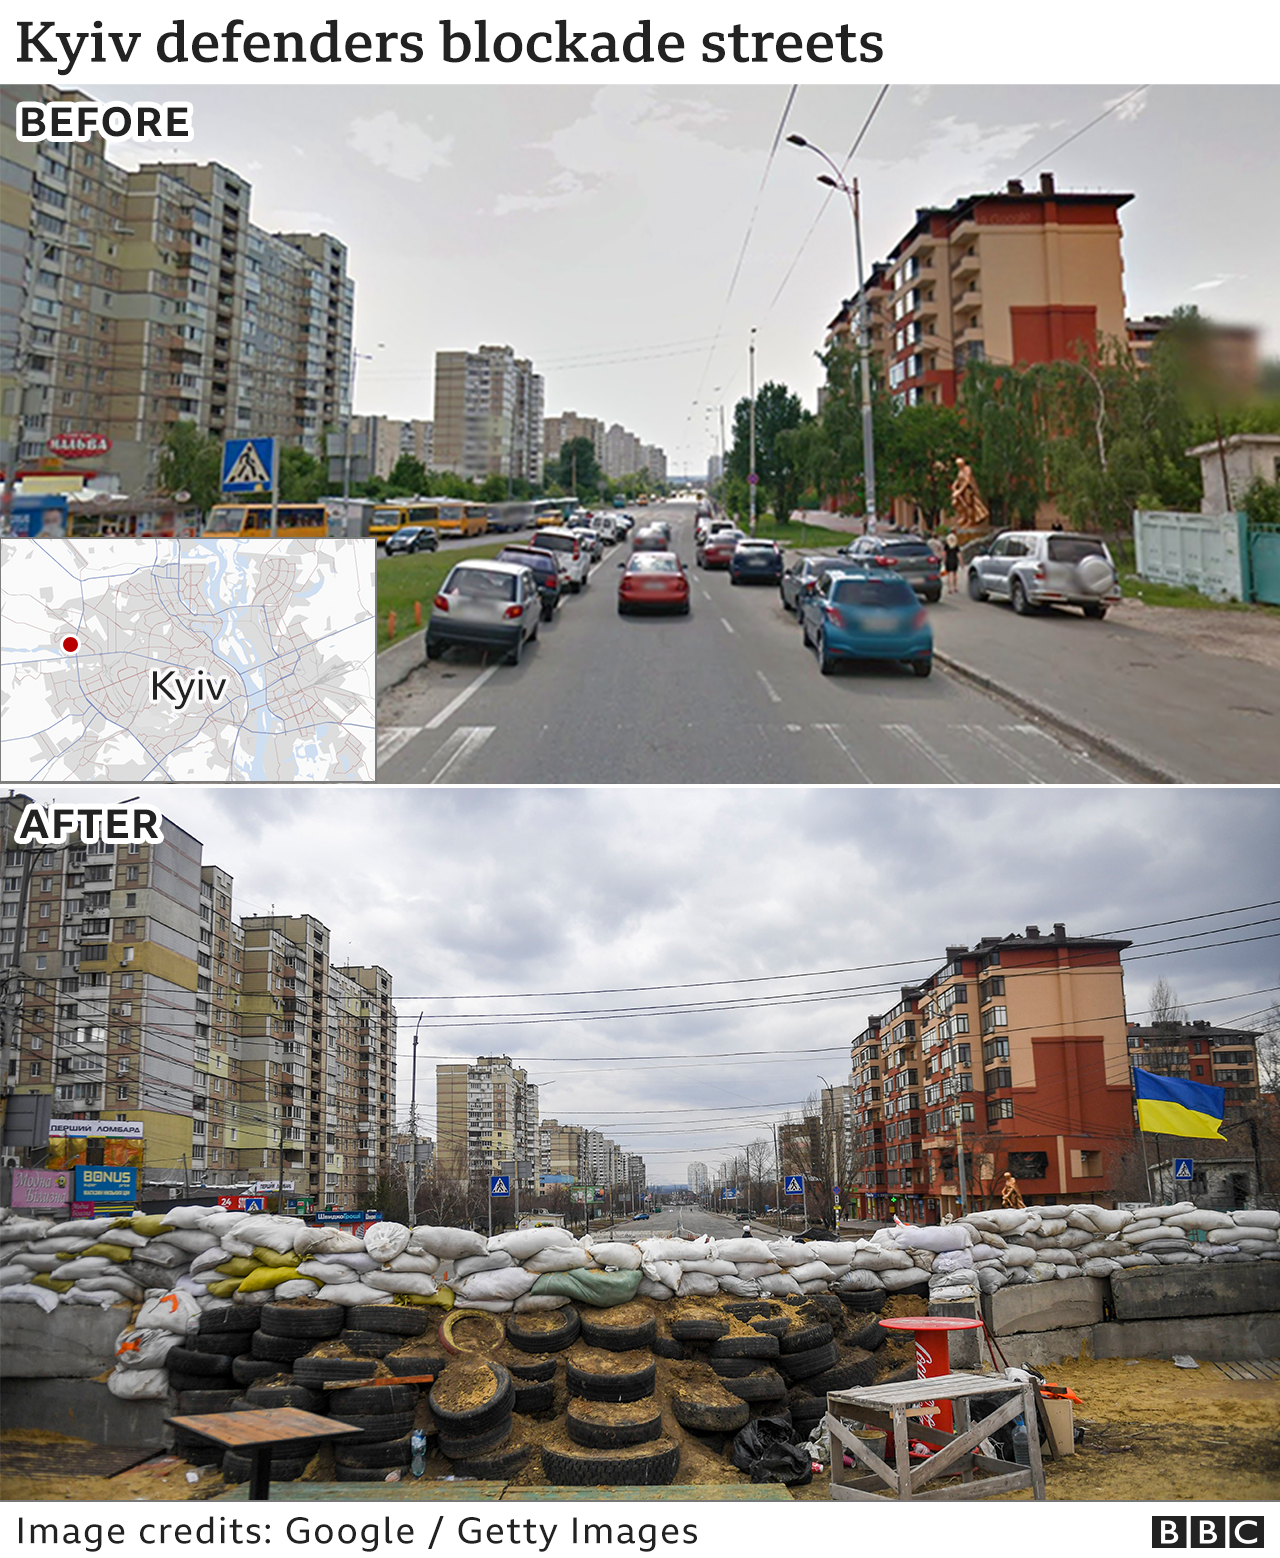 Images showing barricades in Kyiv